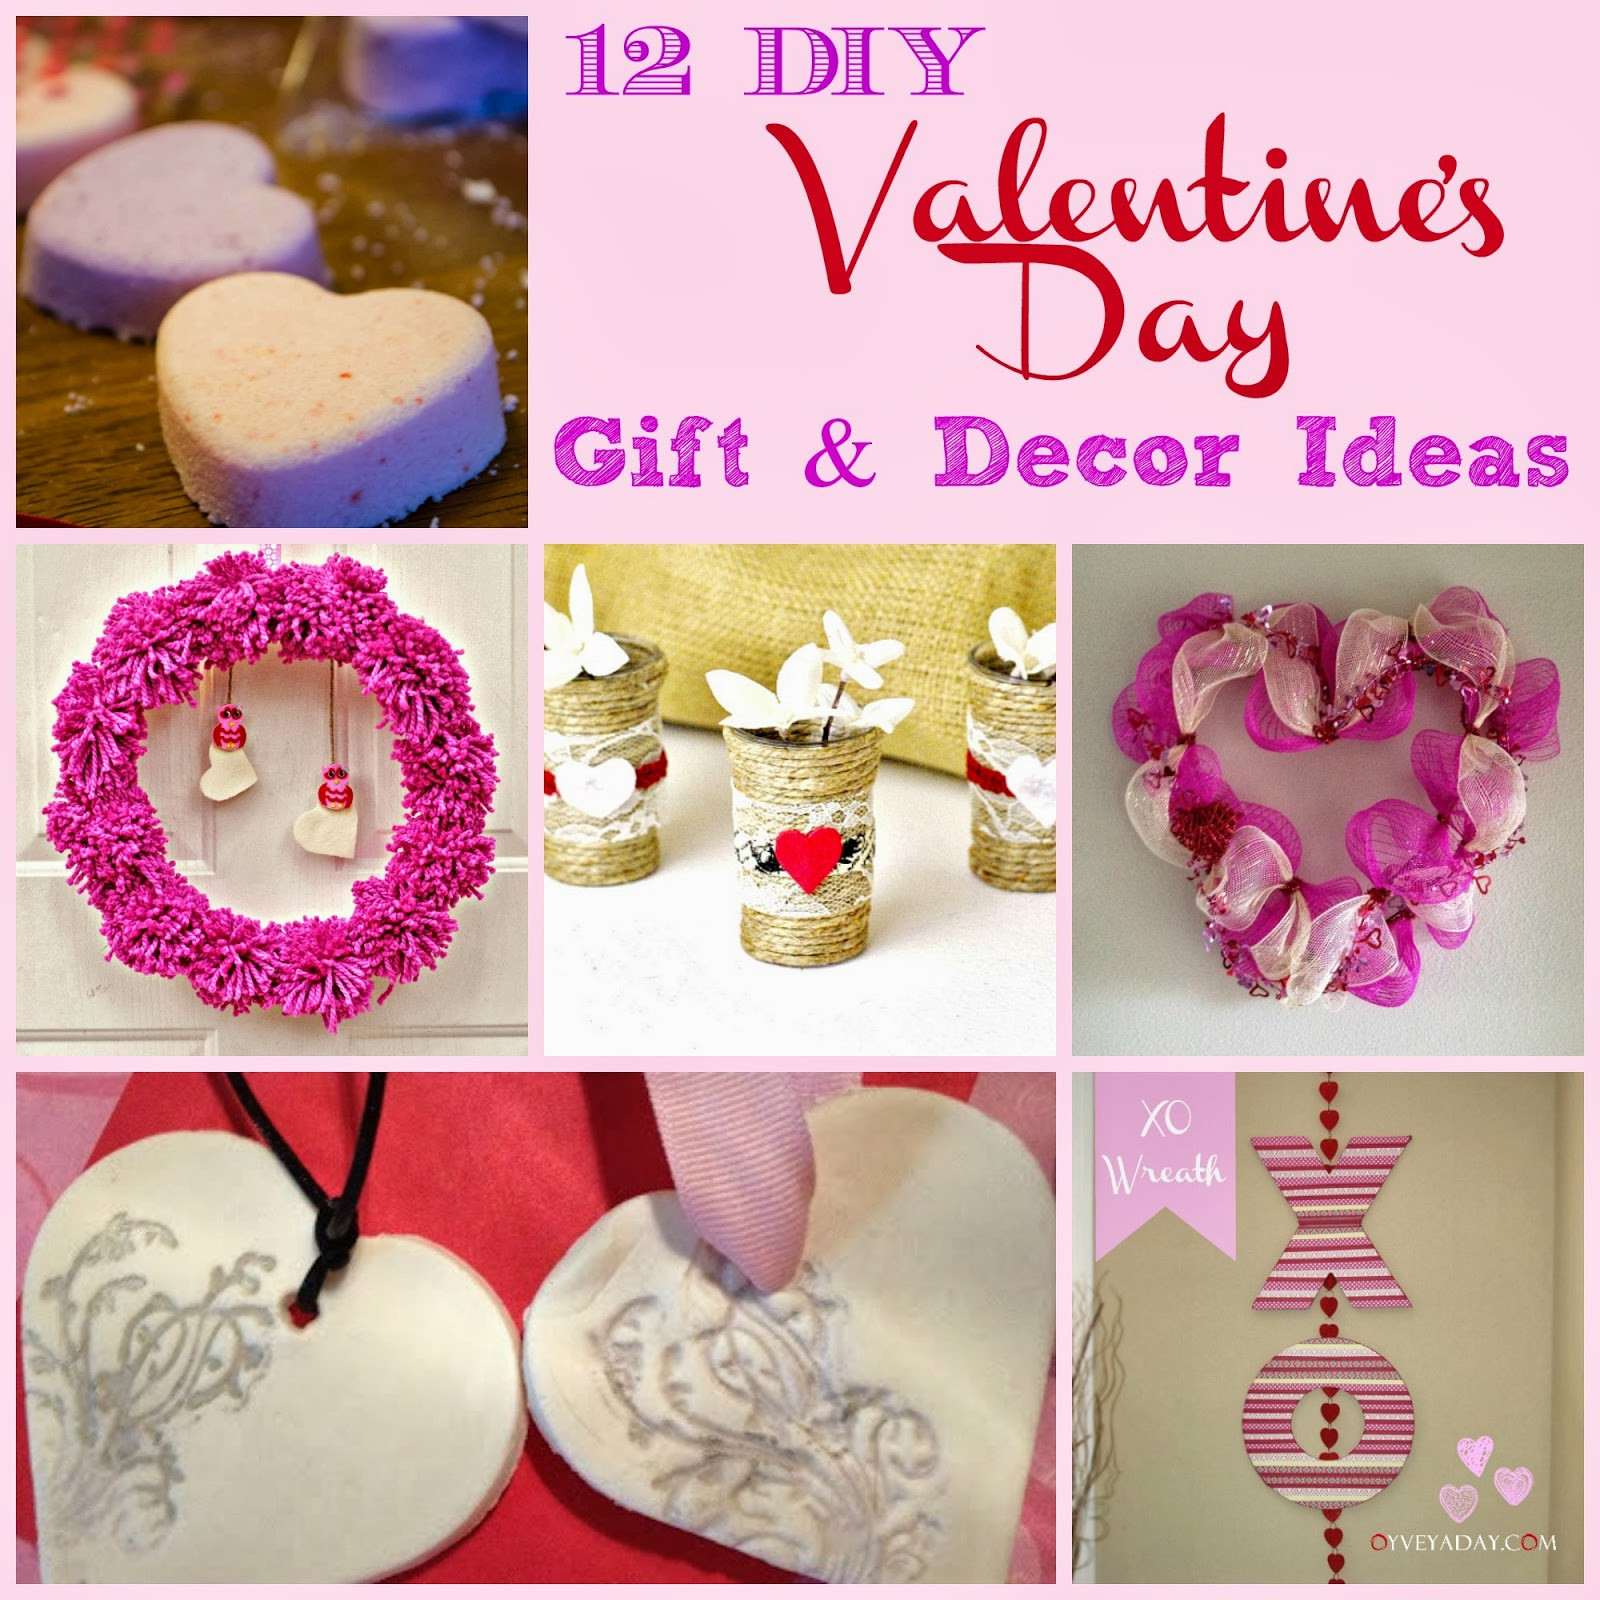 Best ideas about Valentine Day Homemade Gift Ideas
. Save or Pin 12 DIY Valentine s Day Gift & Decor Ideas Outnumbered 3 to 1 Now.